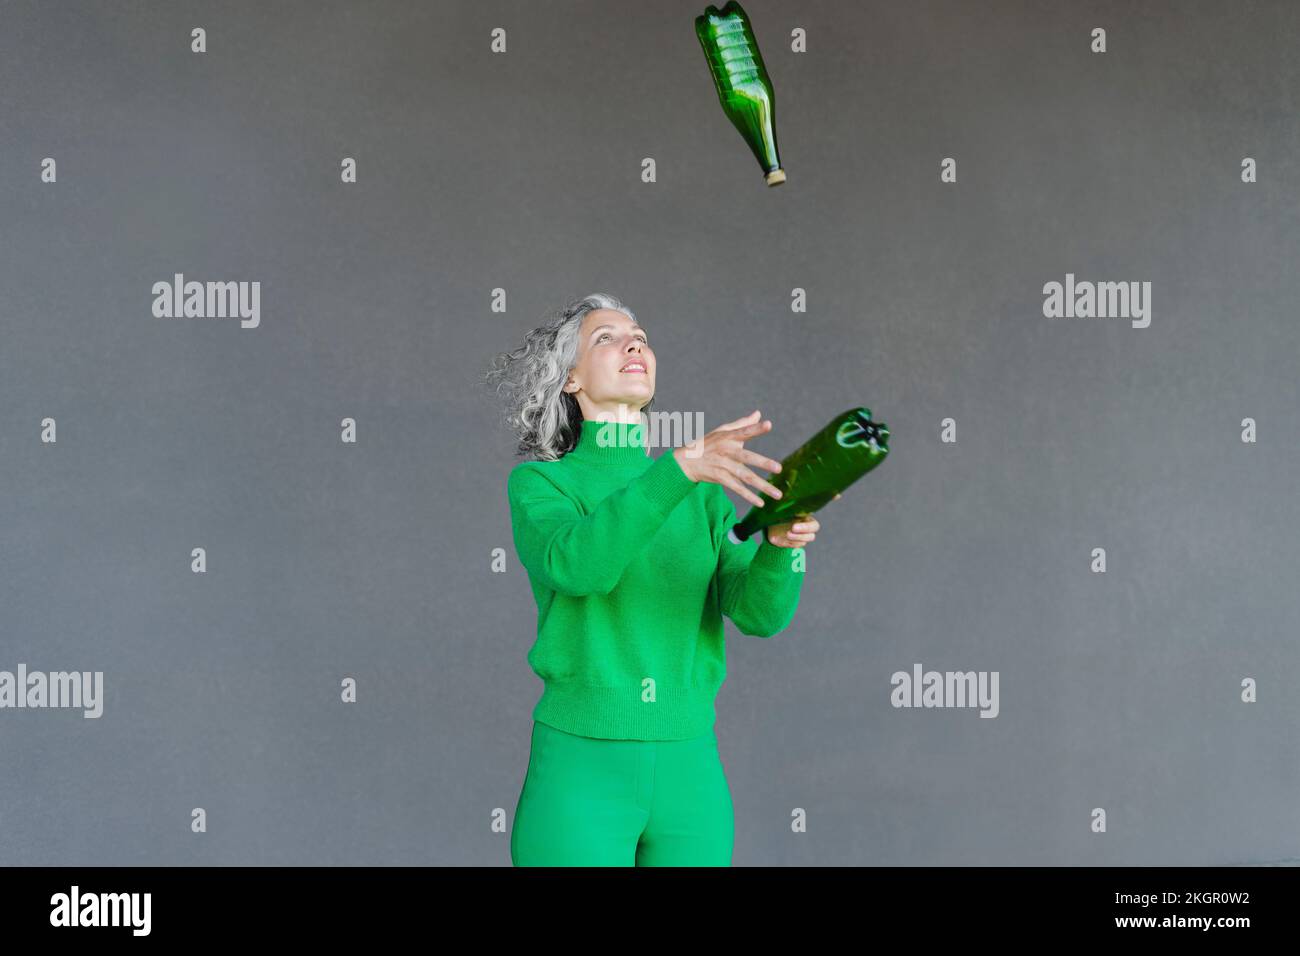 Woman throwing plastic water bottle in front of wall Stock Photo